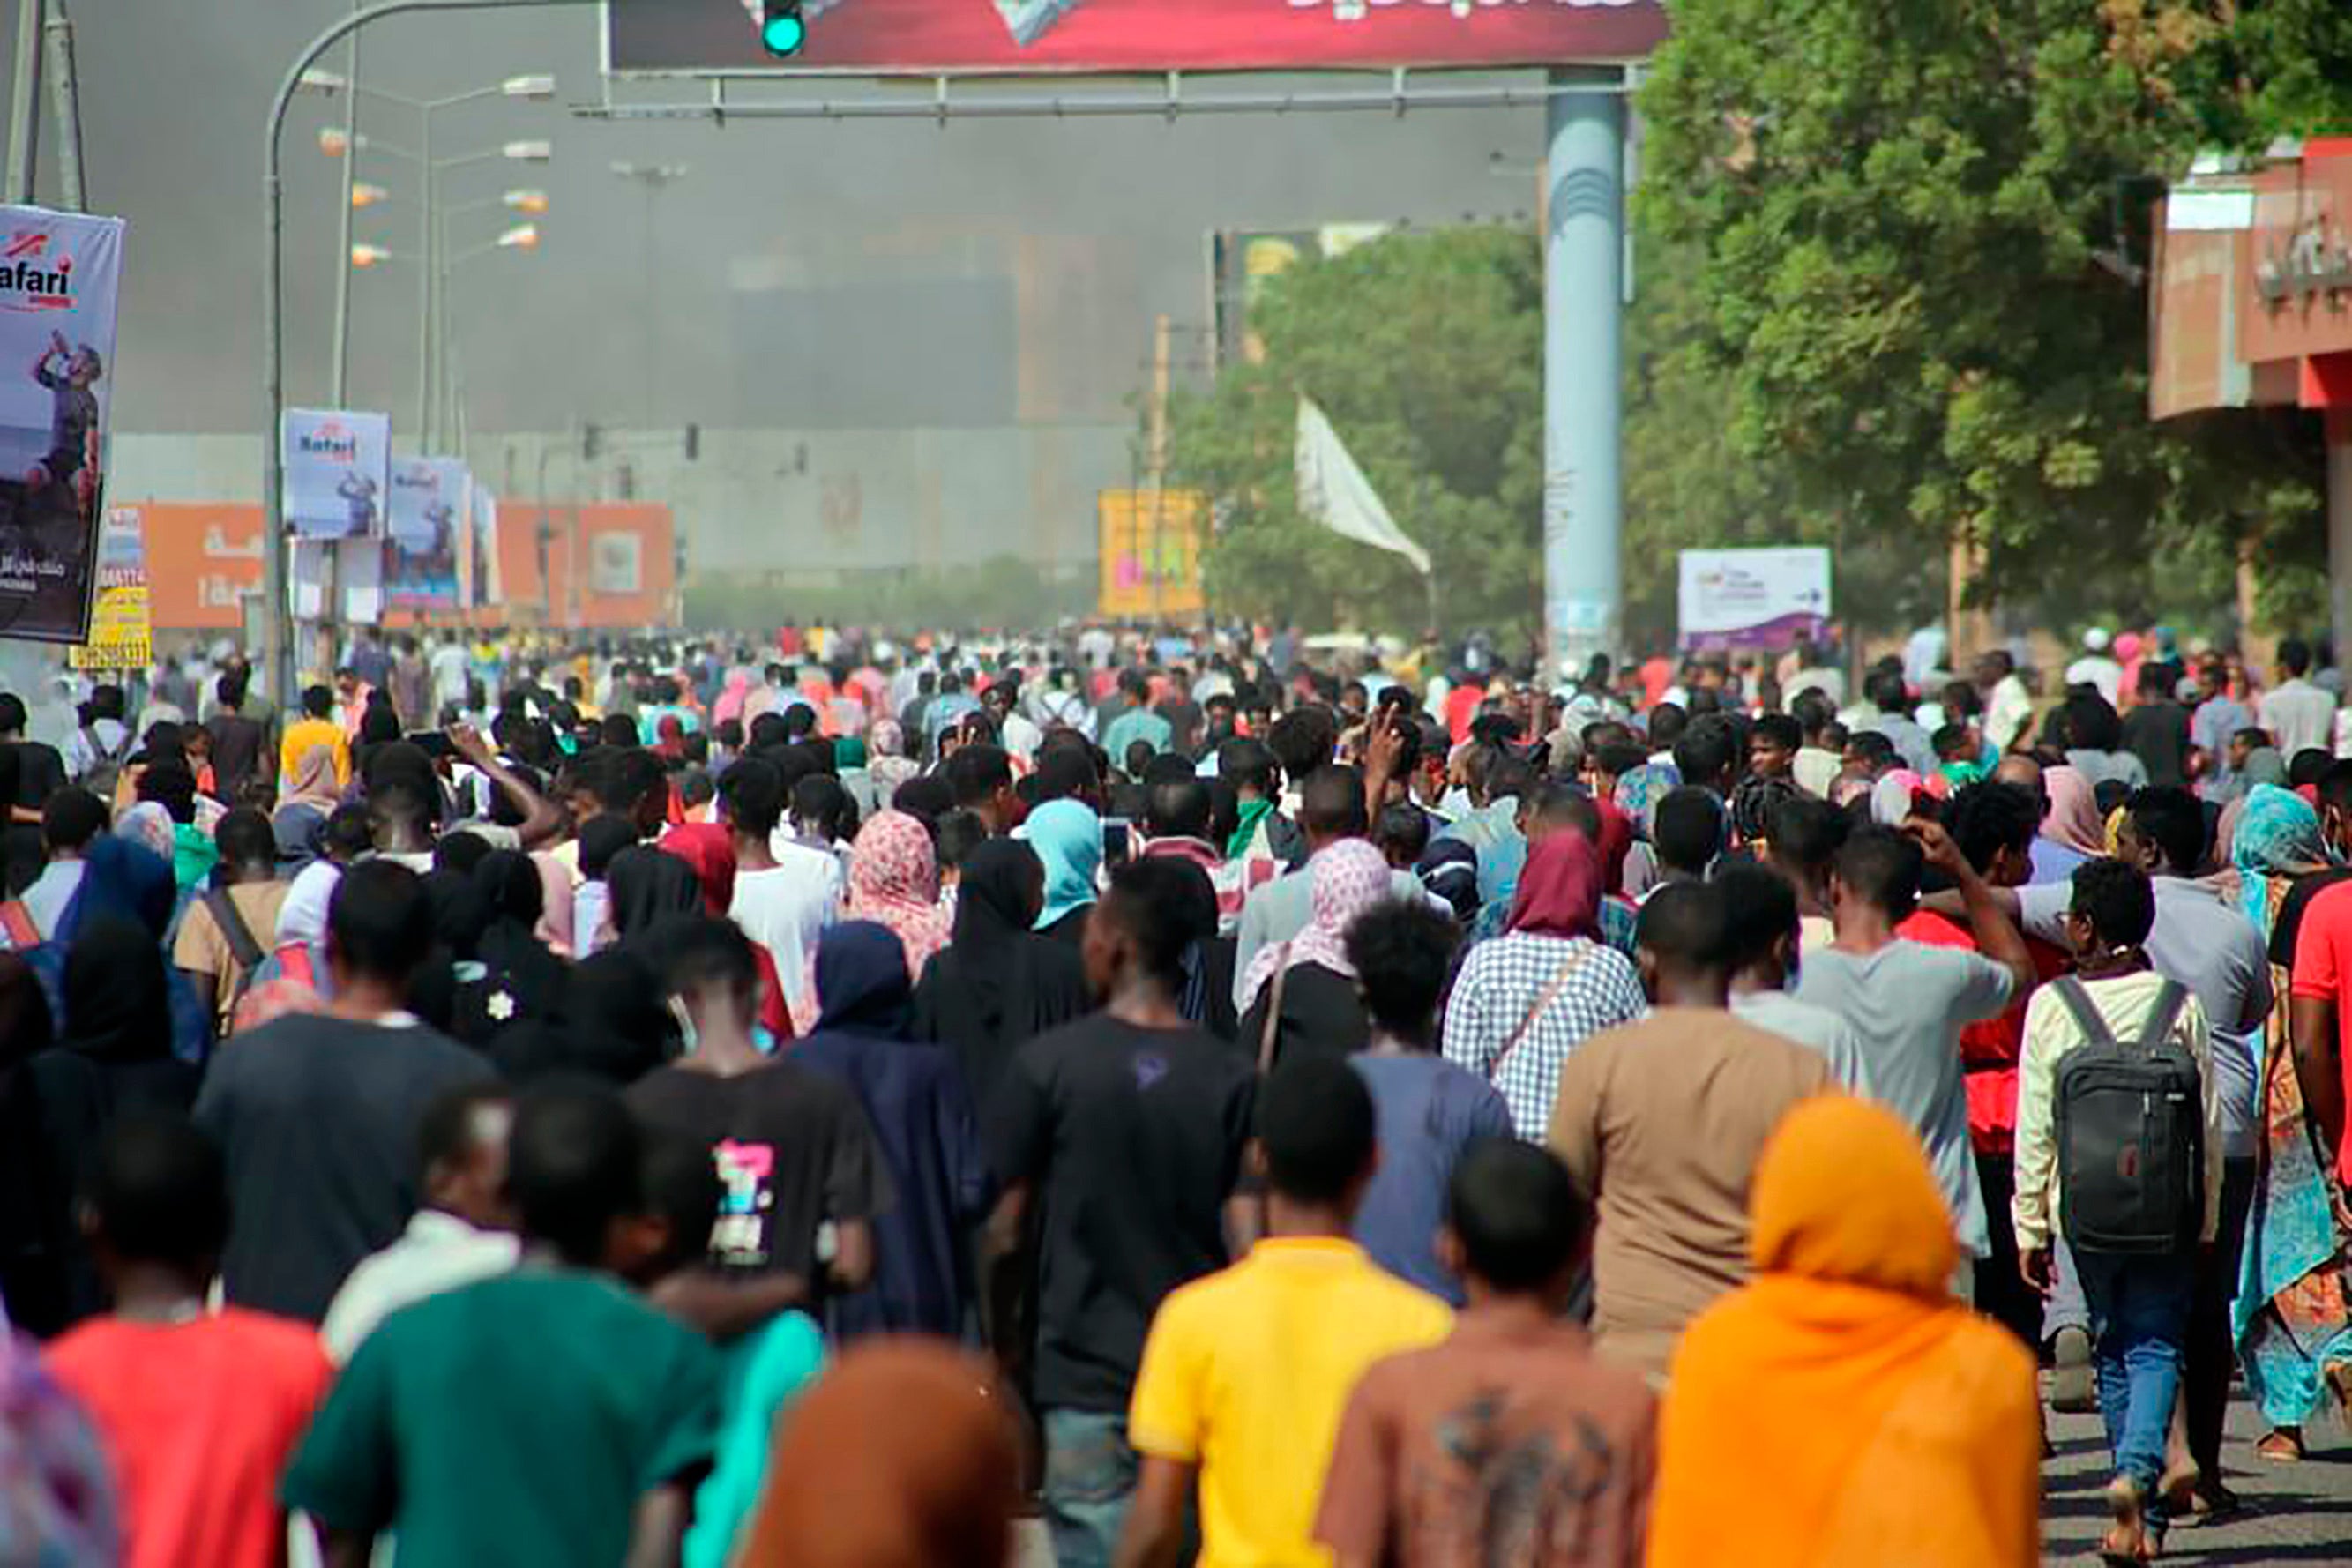 A crowd of protesters in the street